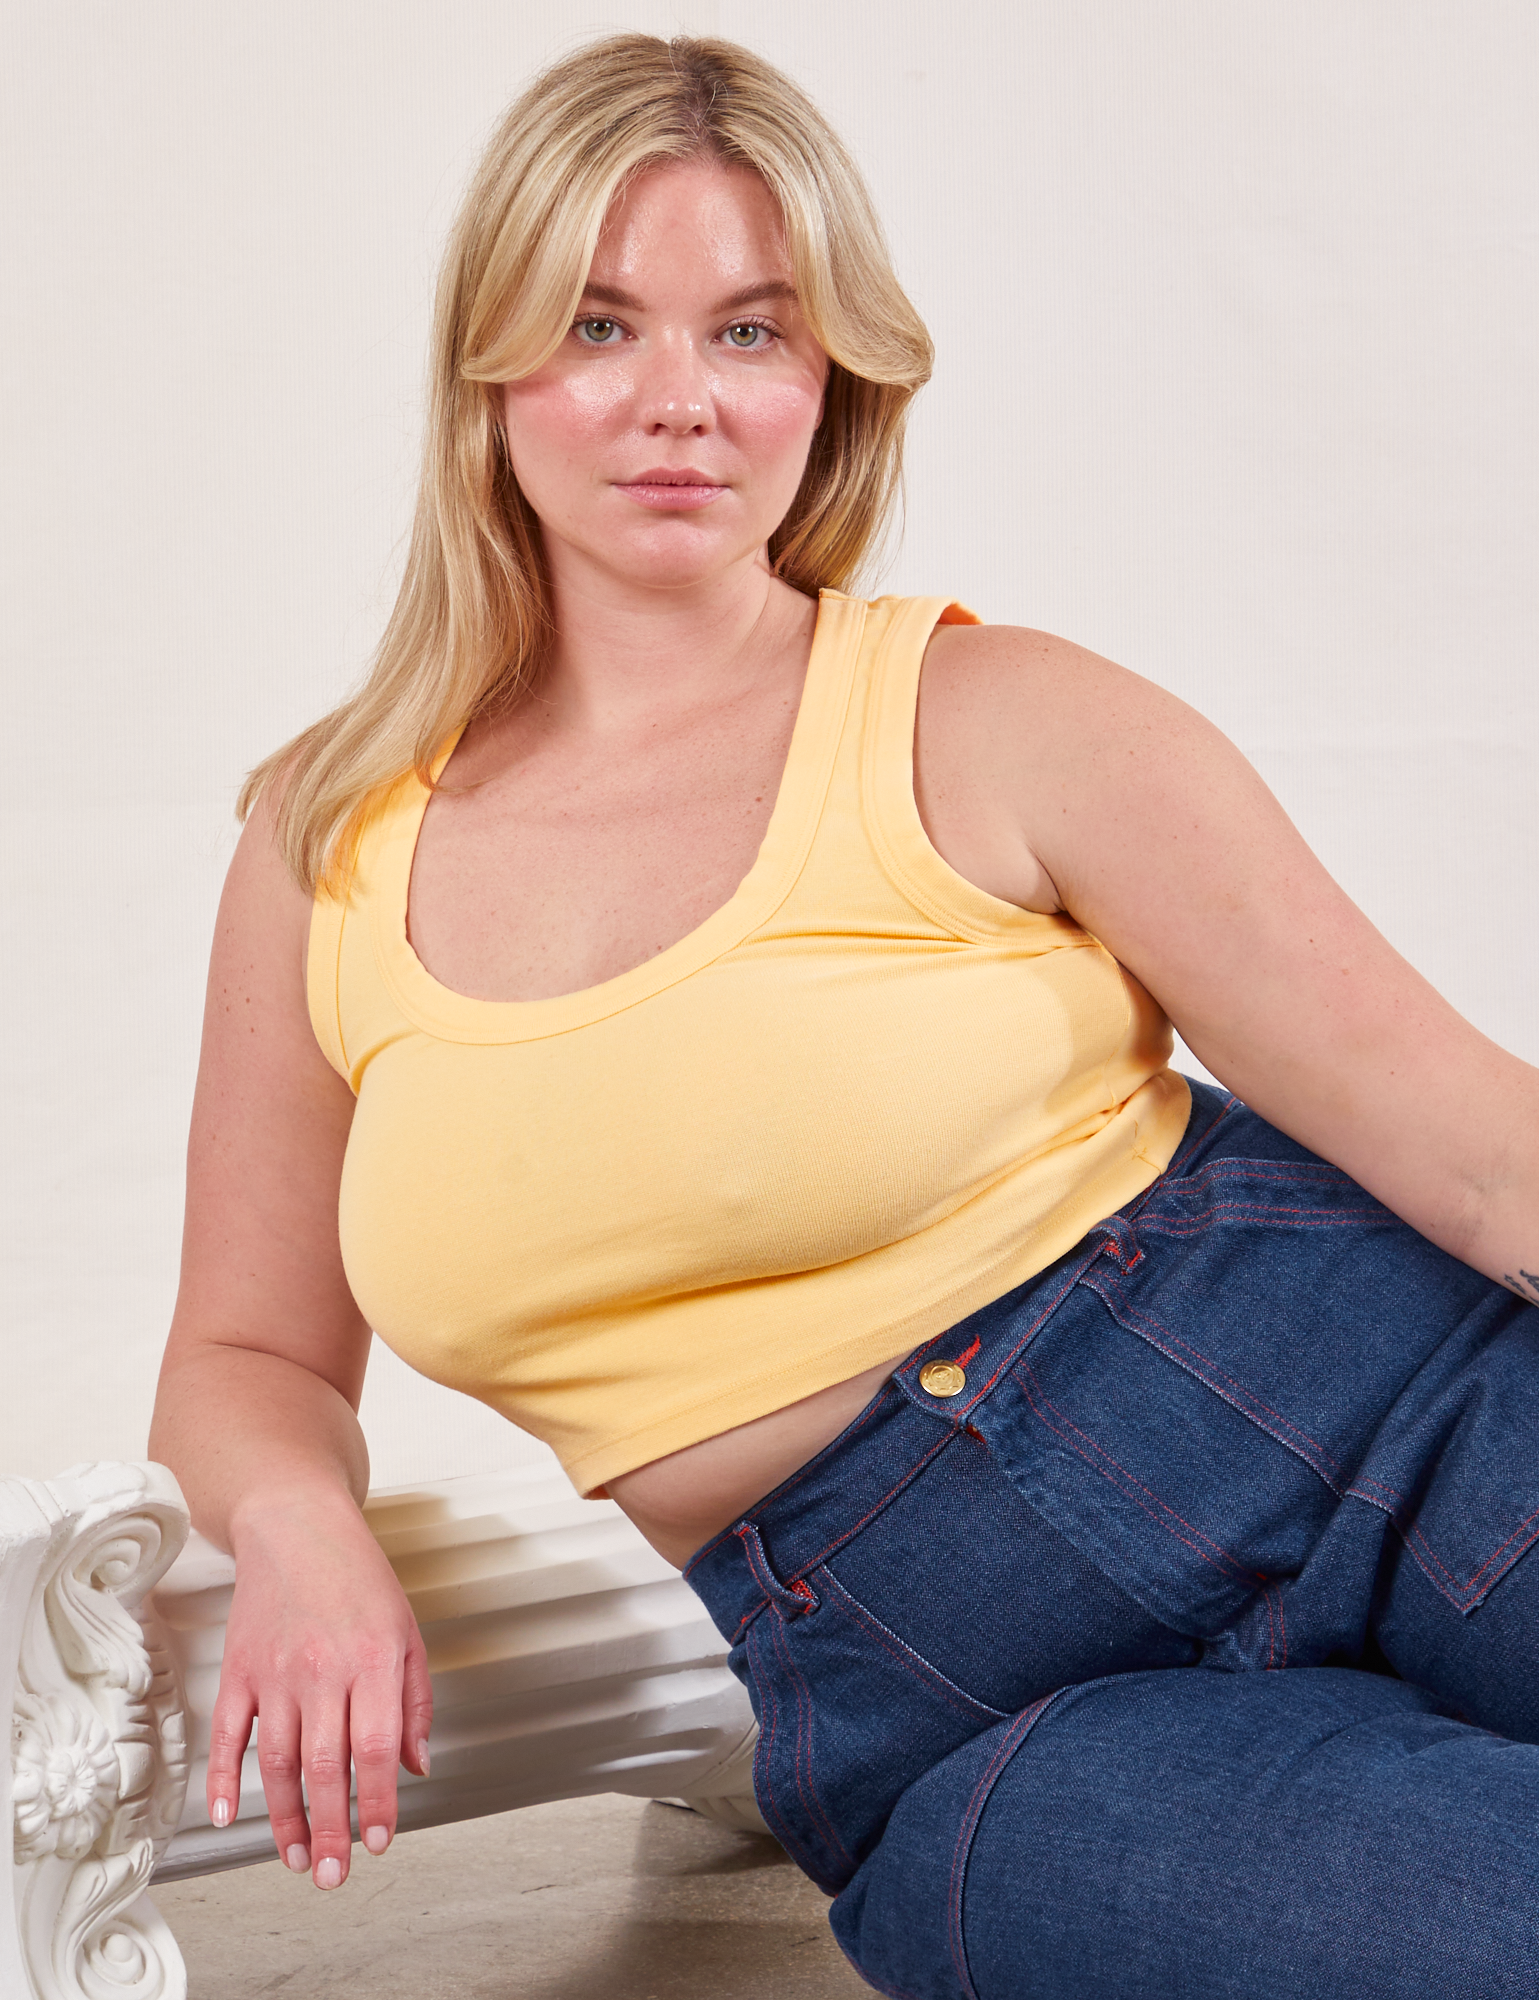 Lish is wearing Cropped Tank Top in Butter Yellow and dark wash Carpenter Jeans